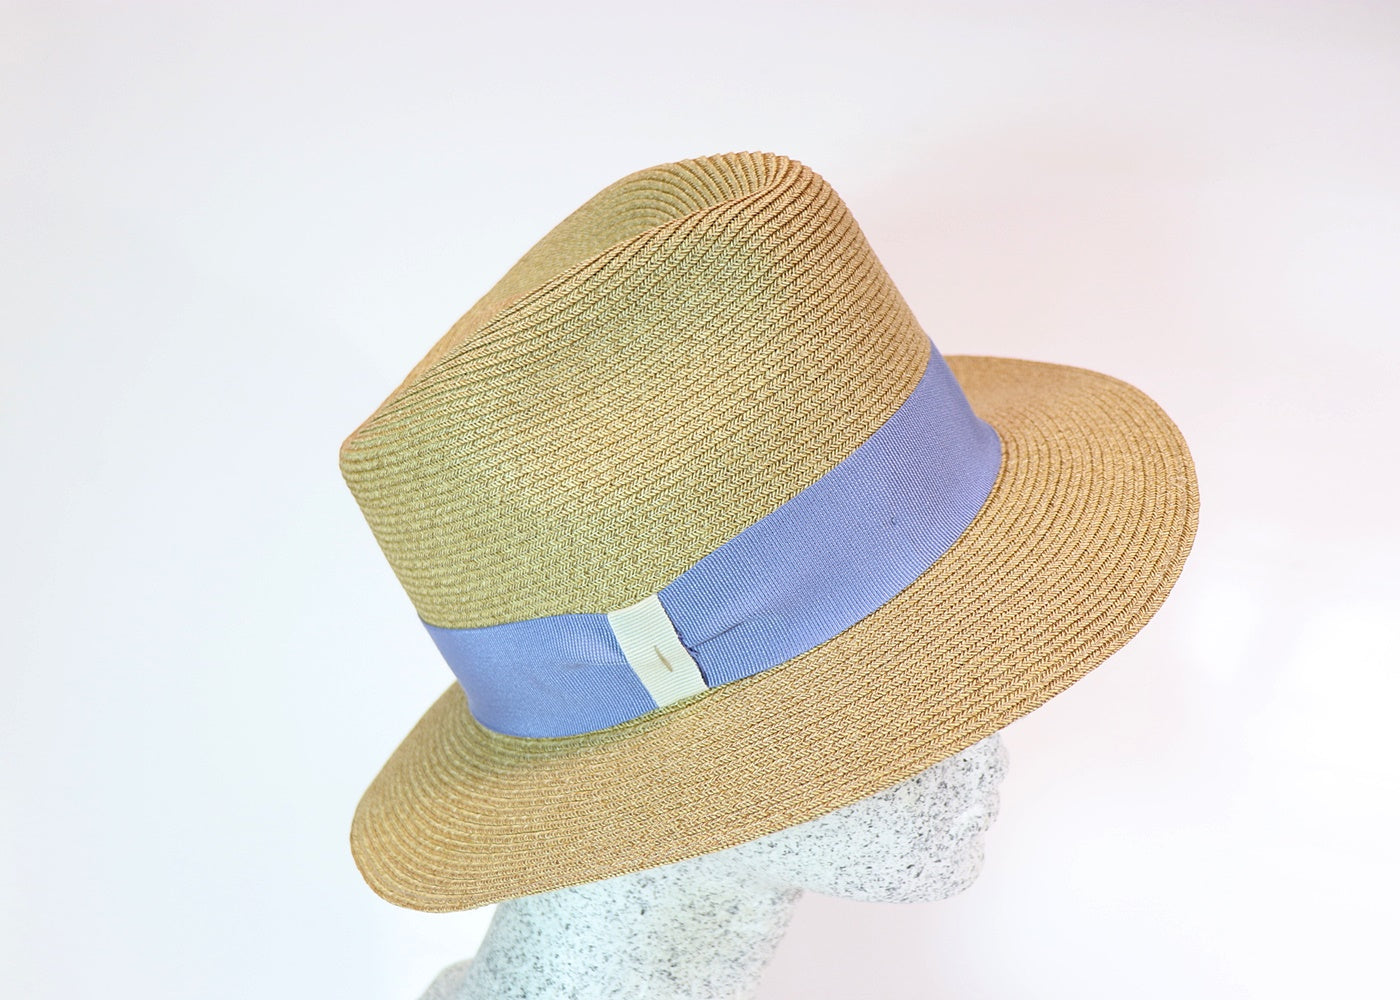 Braided straw hat men's style natural